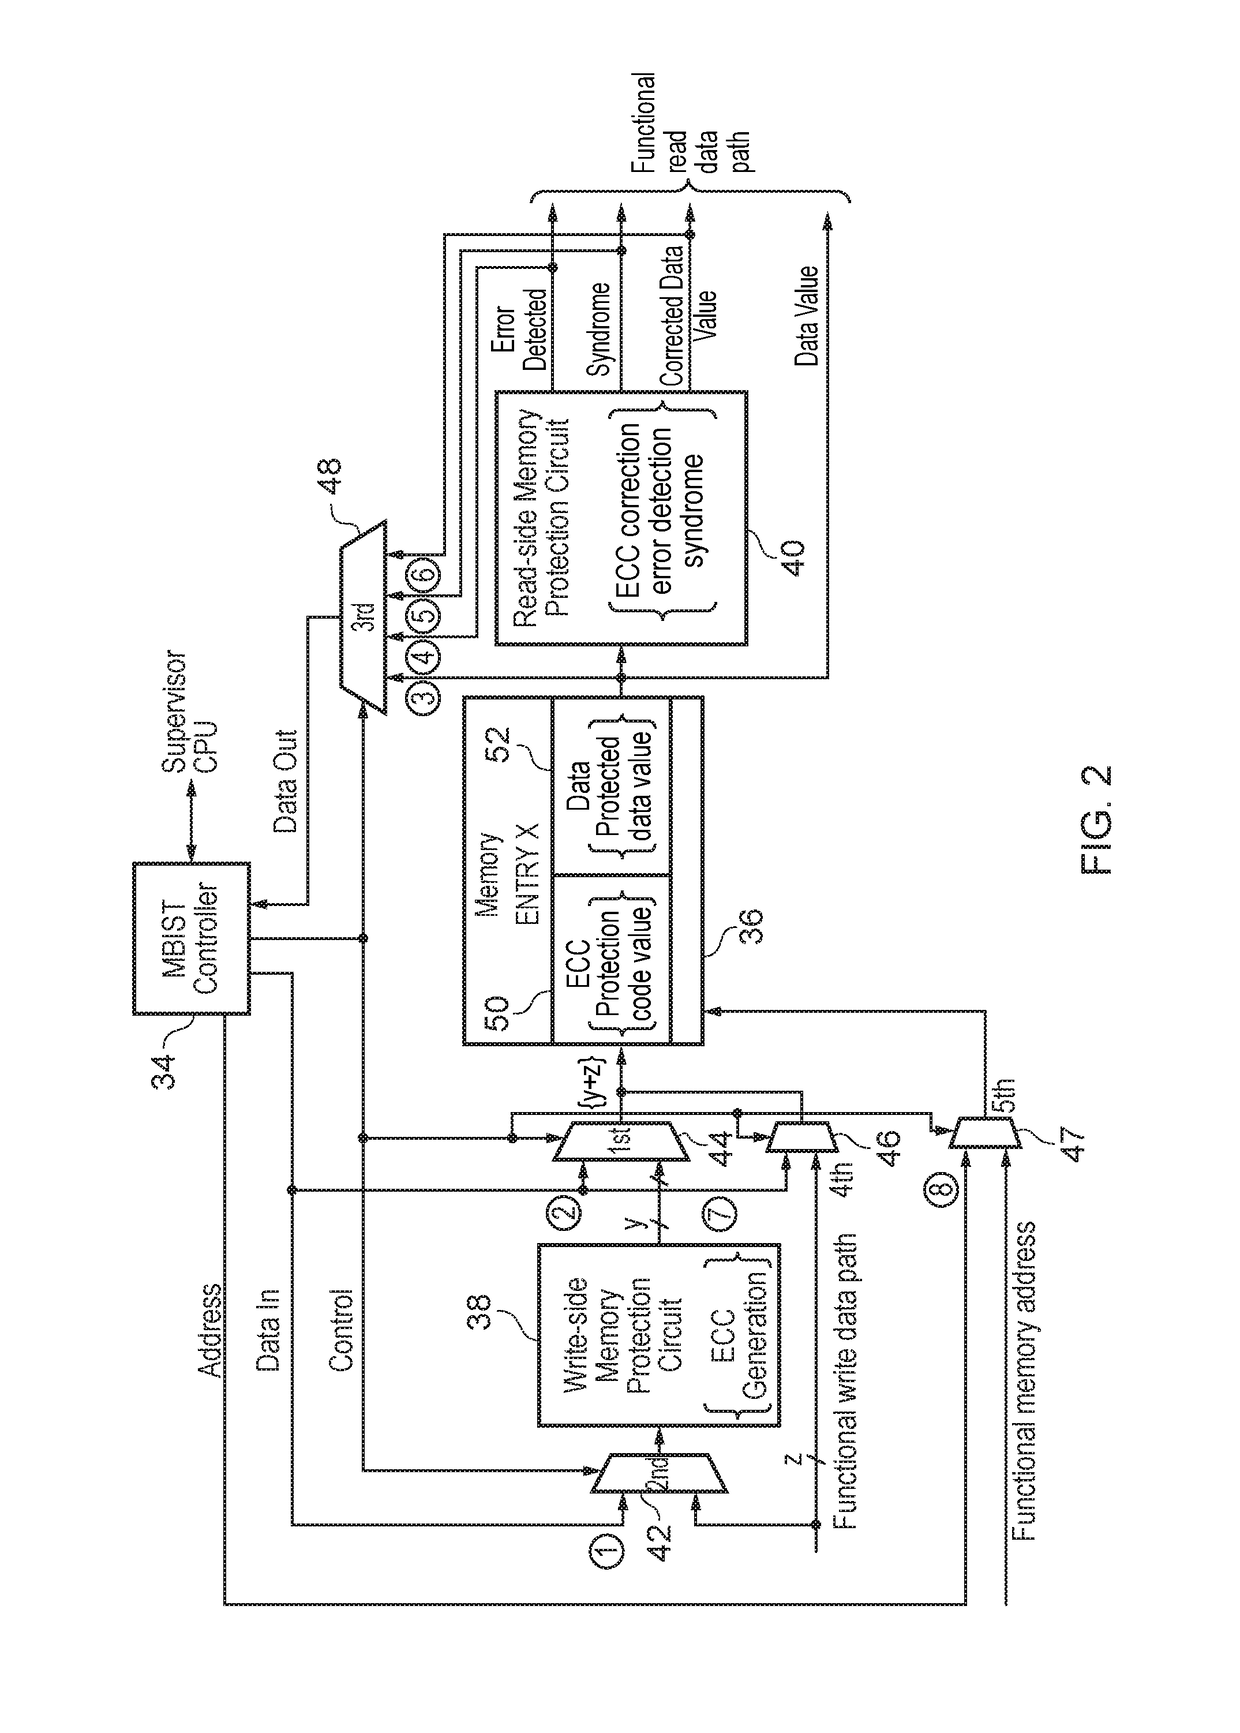 Memory protection circuitry testing and memory scrubbing using memory built-in self-test